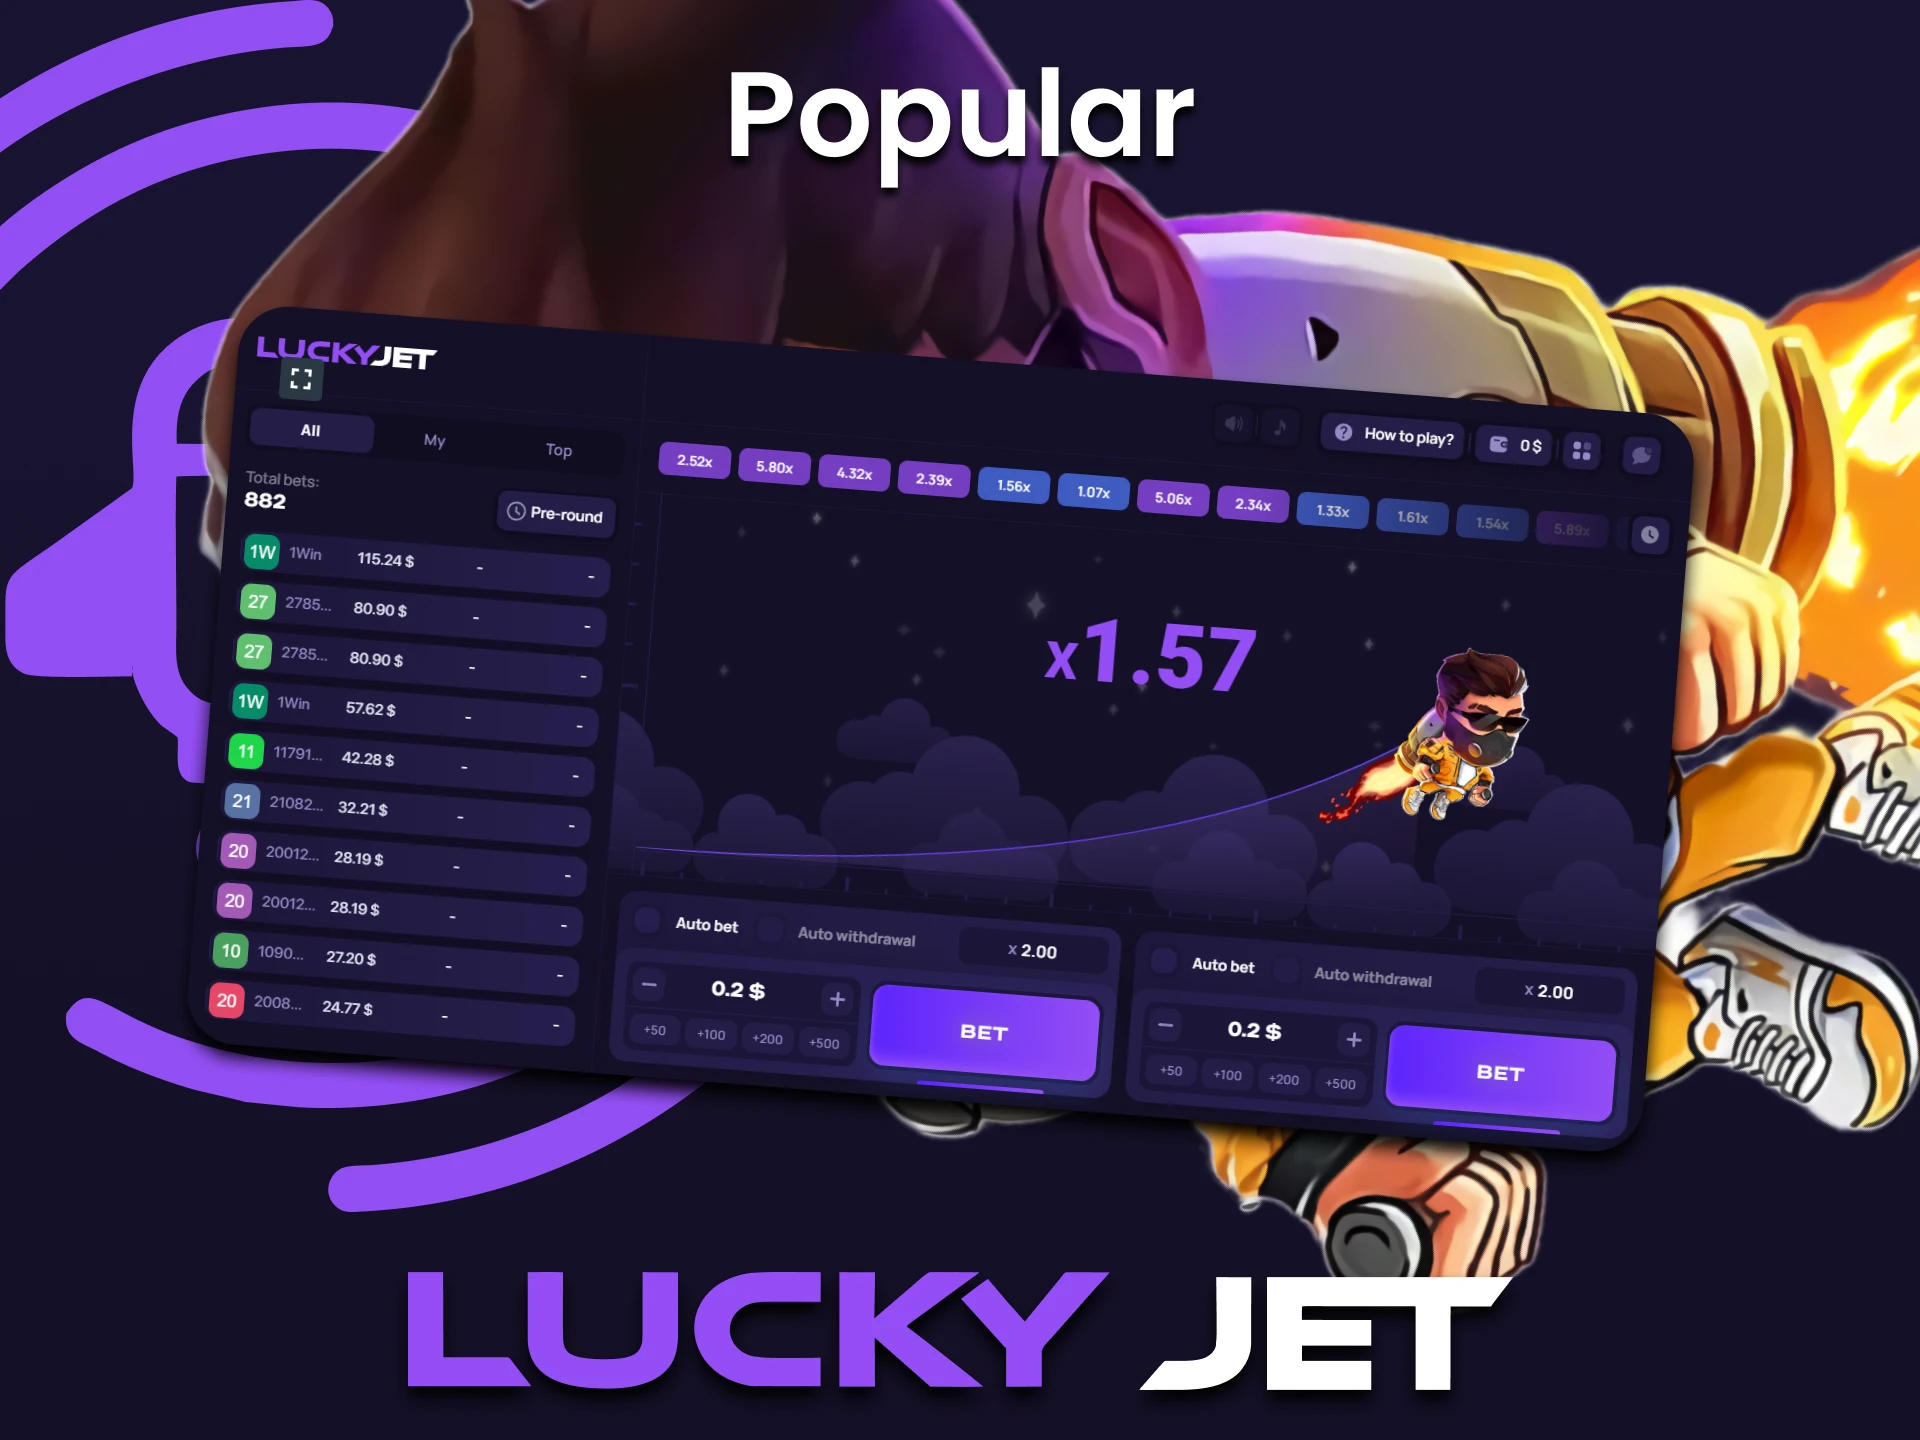 The Lucky Jet India game is at the peak of its popularity right now.